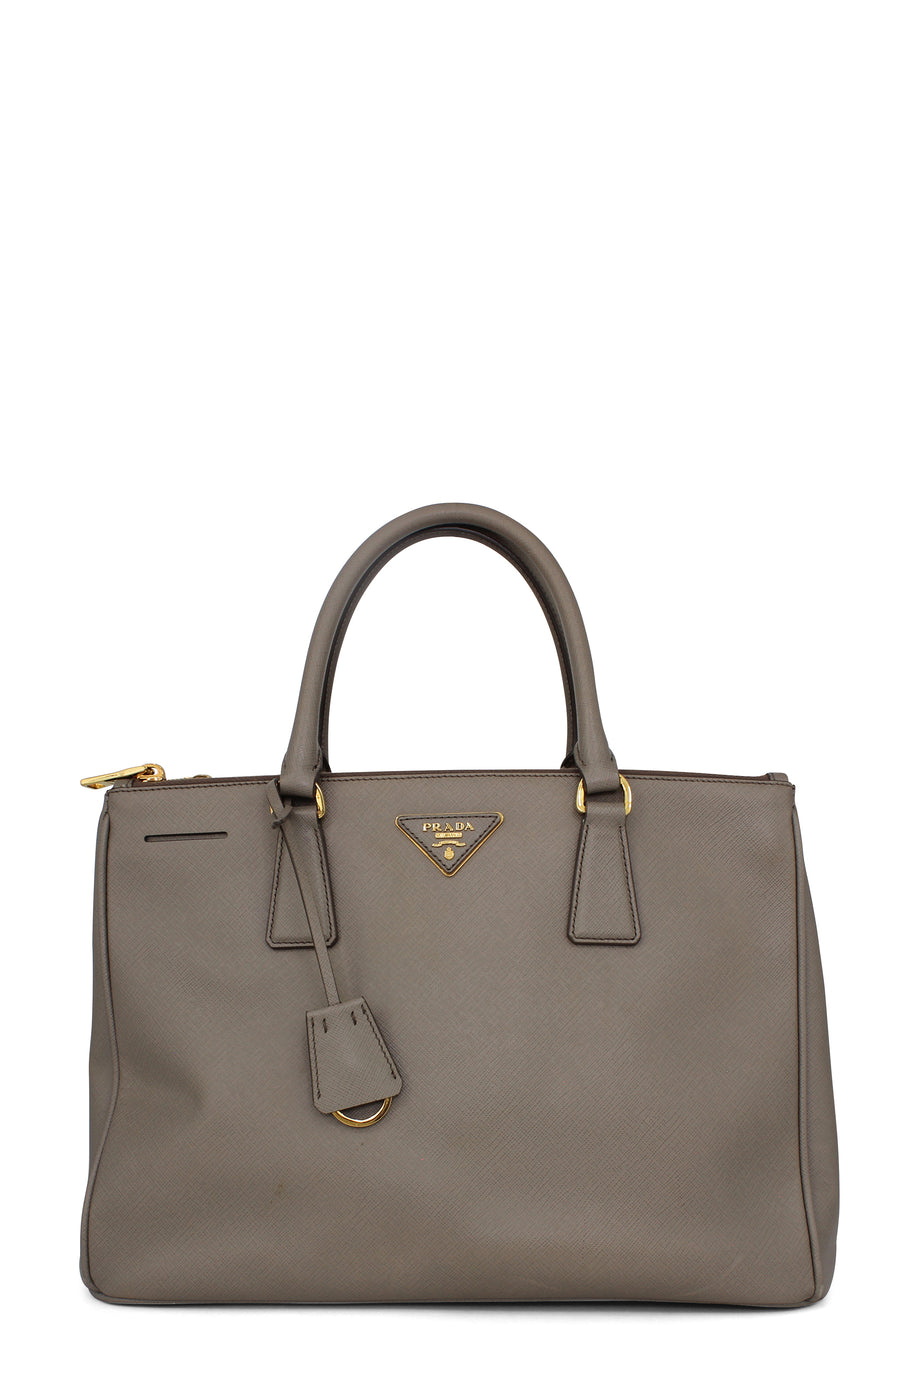 Buy Authentic, Preloved Prada Large Saffiano Lux Double Zip Tote